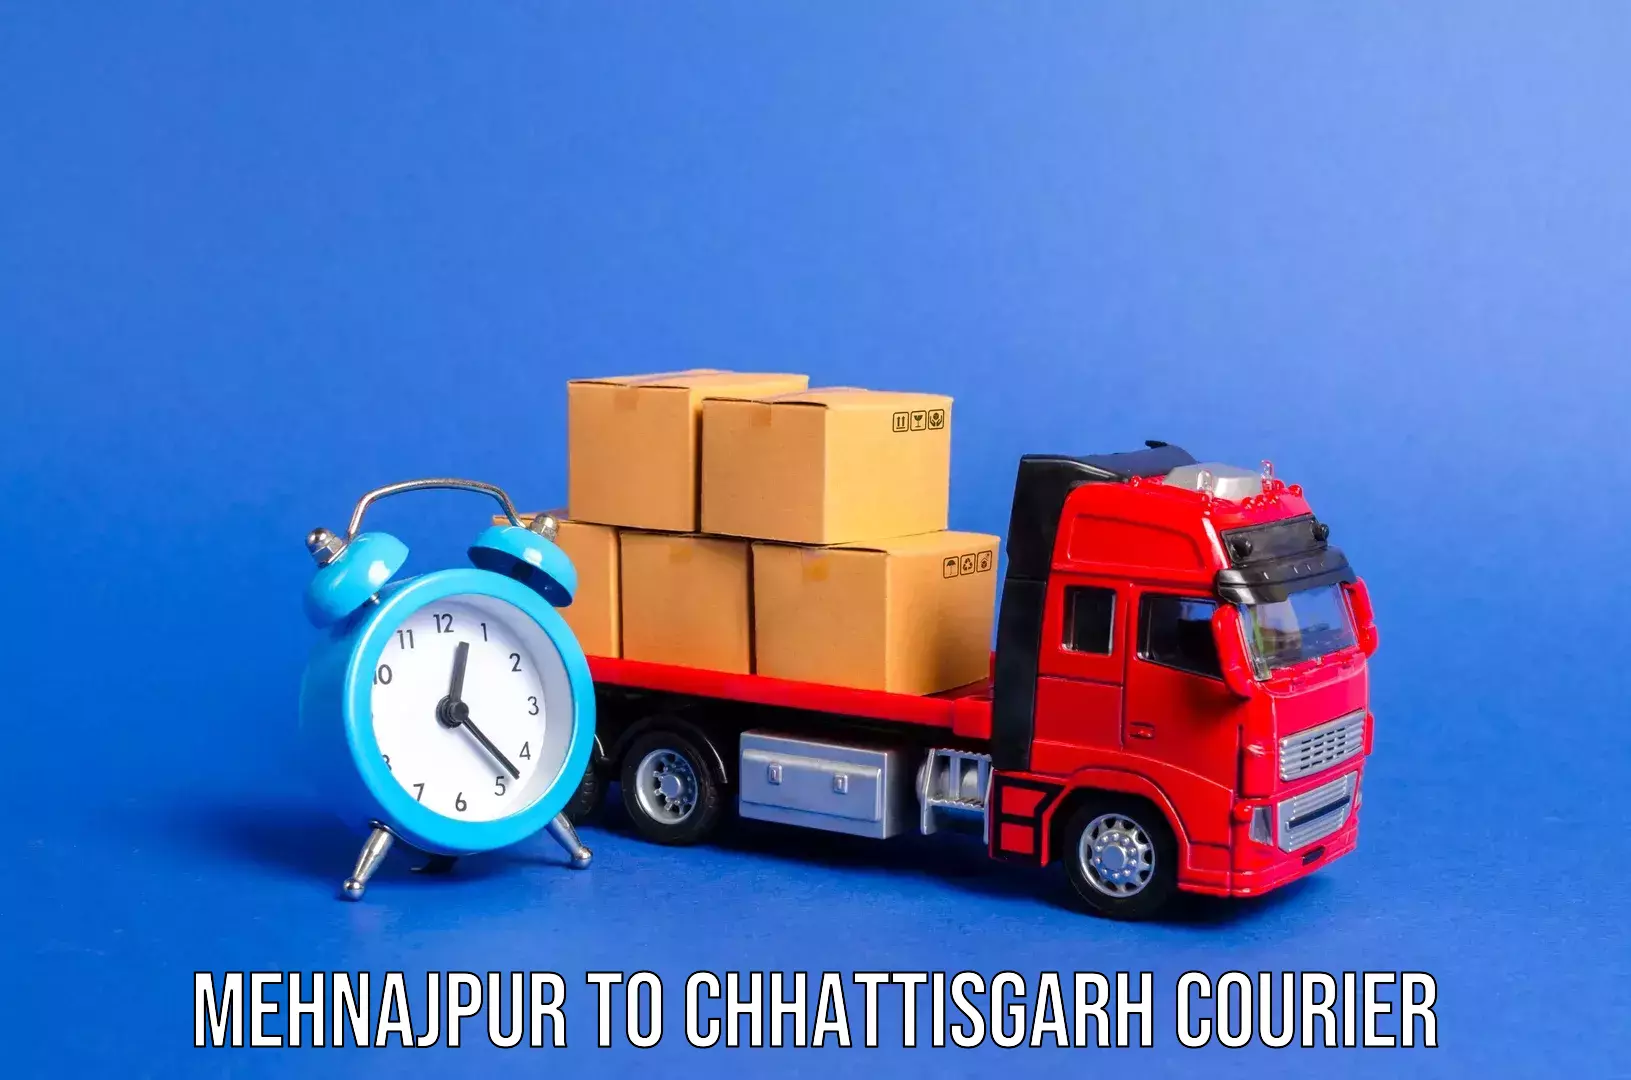 Luggage transport consulting Mehnajpur to Pendra